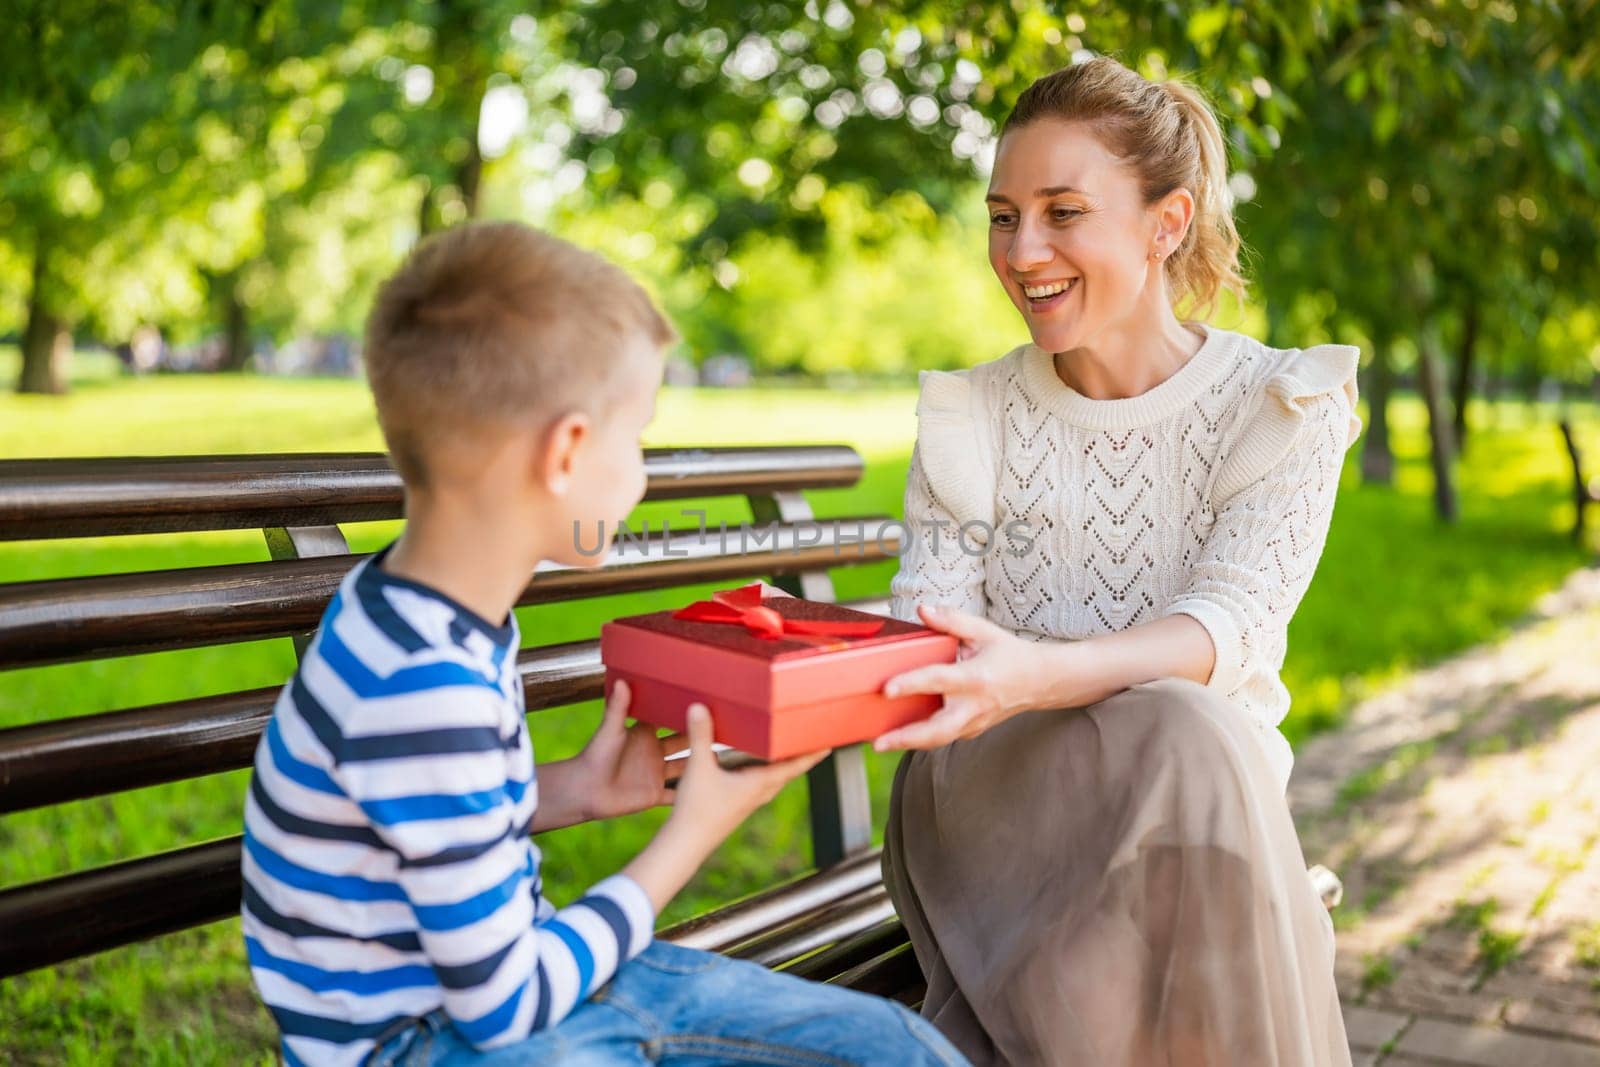 Happy mother is sitting with her son on bench in park. Boy is giving a present to his mother.